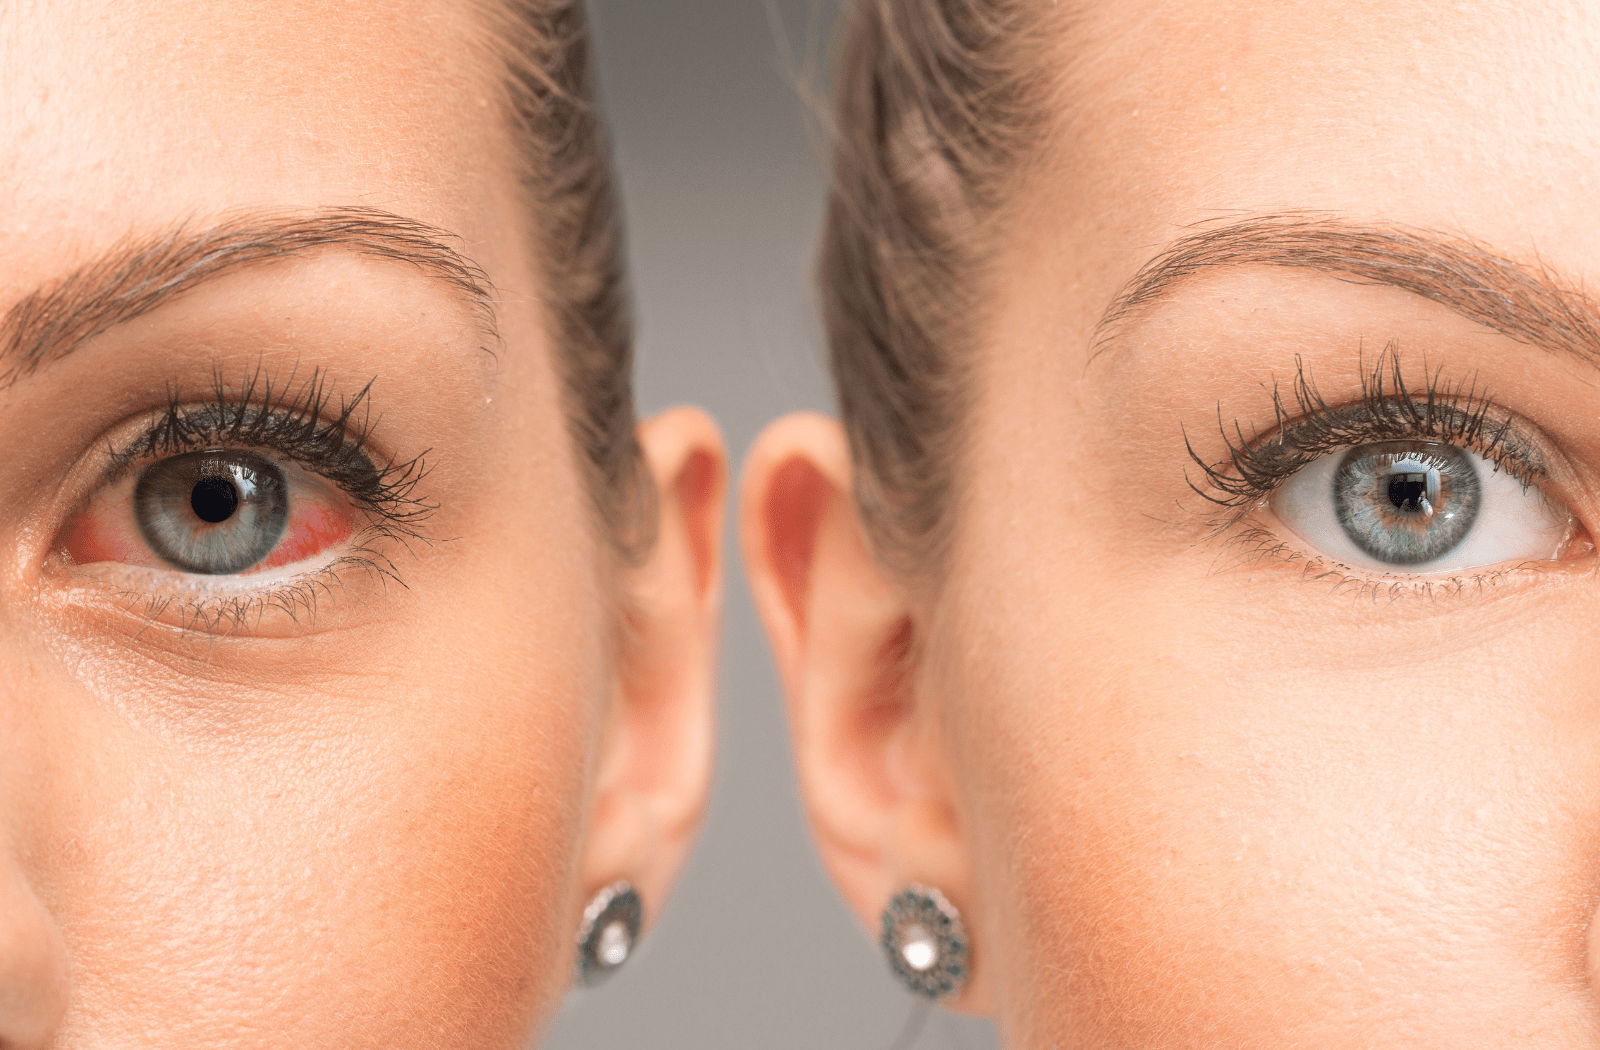 A comparison image of a woman's healthy eye with a woman's dry and red eye